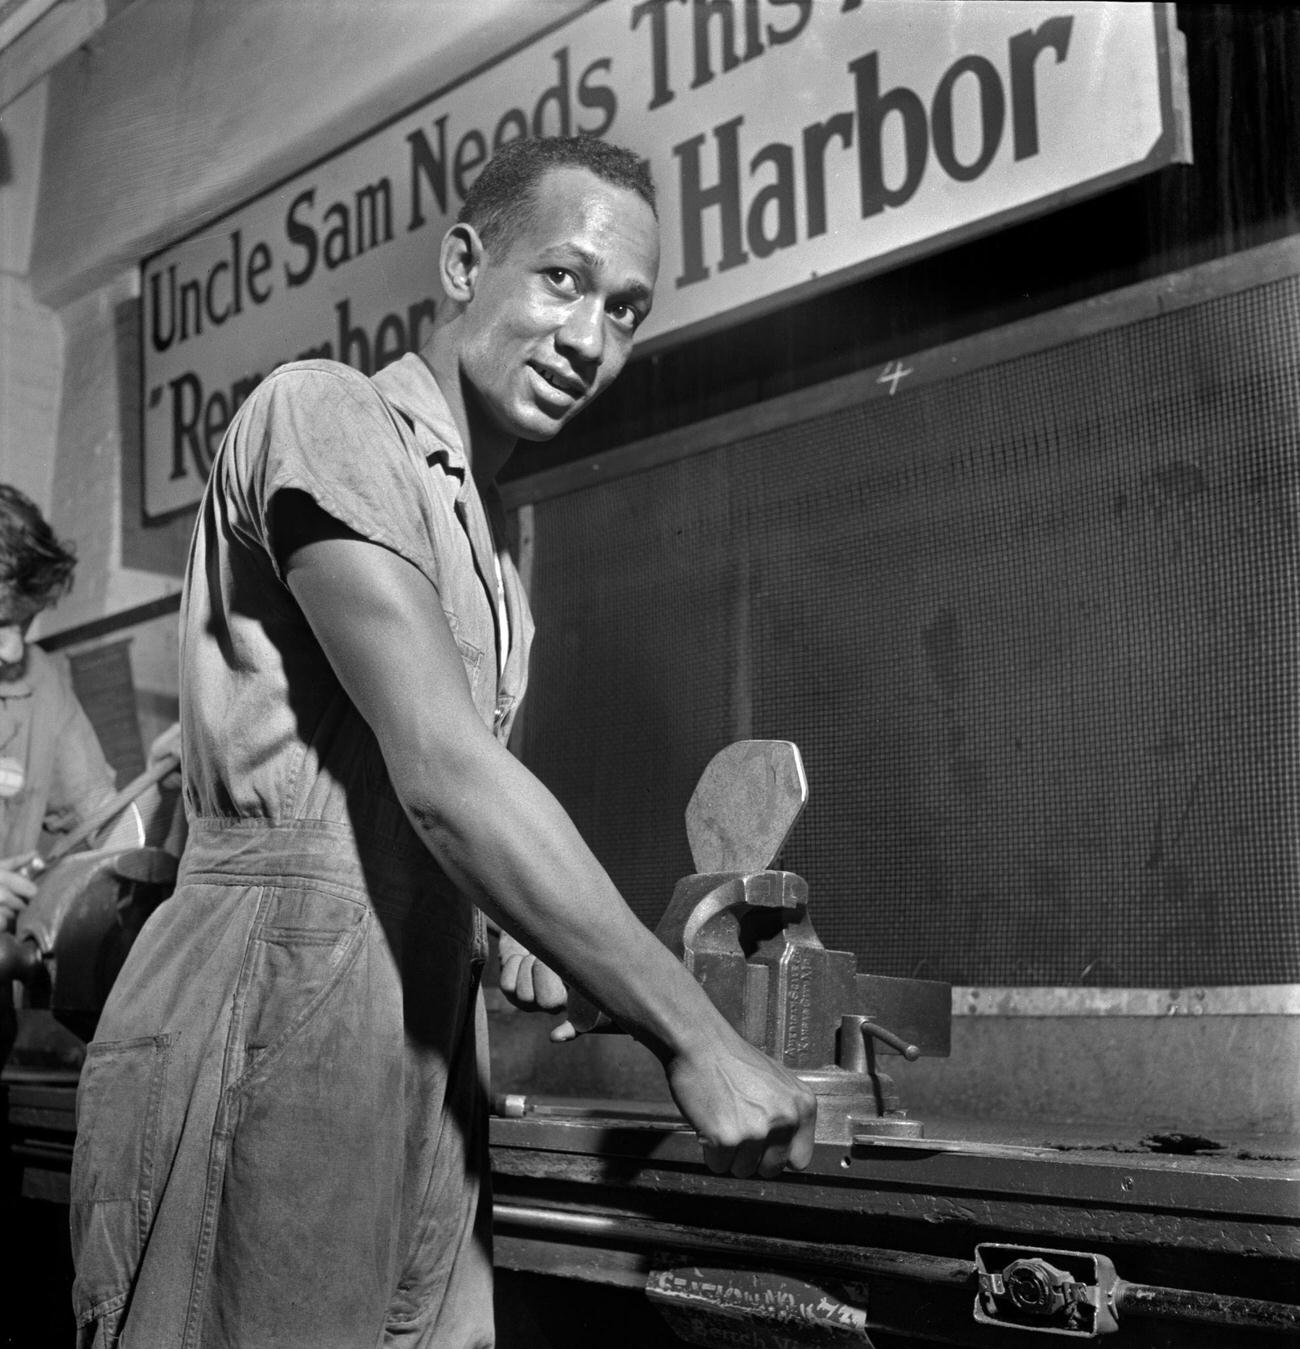 Young Man Trained In Machine Shop Practice At National Youth Administration Work Center, Brooklyn, 1942